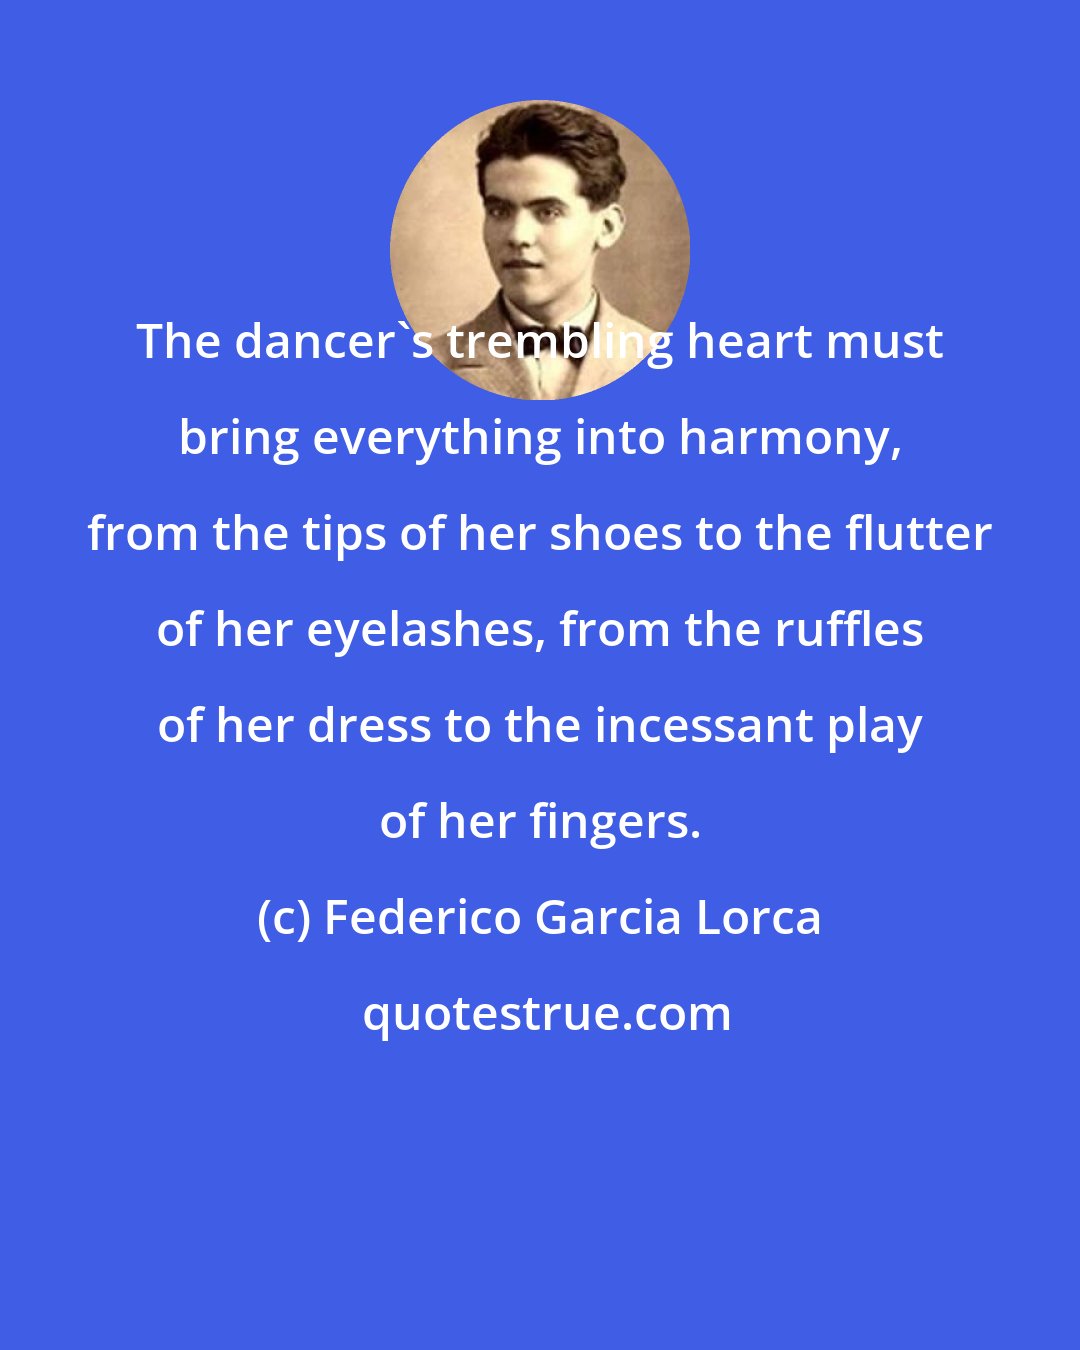 Federico Garcia Lorca: The dancer's trembling heart must bring everything into harmony, from the tips of her shoes to the flutter of her eyelashes, from the ruffles of her dress to the incessant play of her fingers.